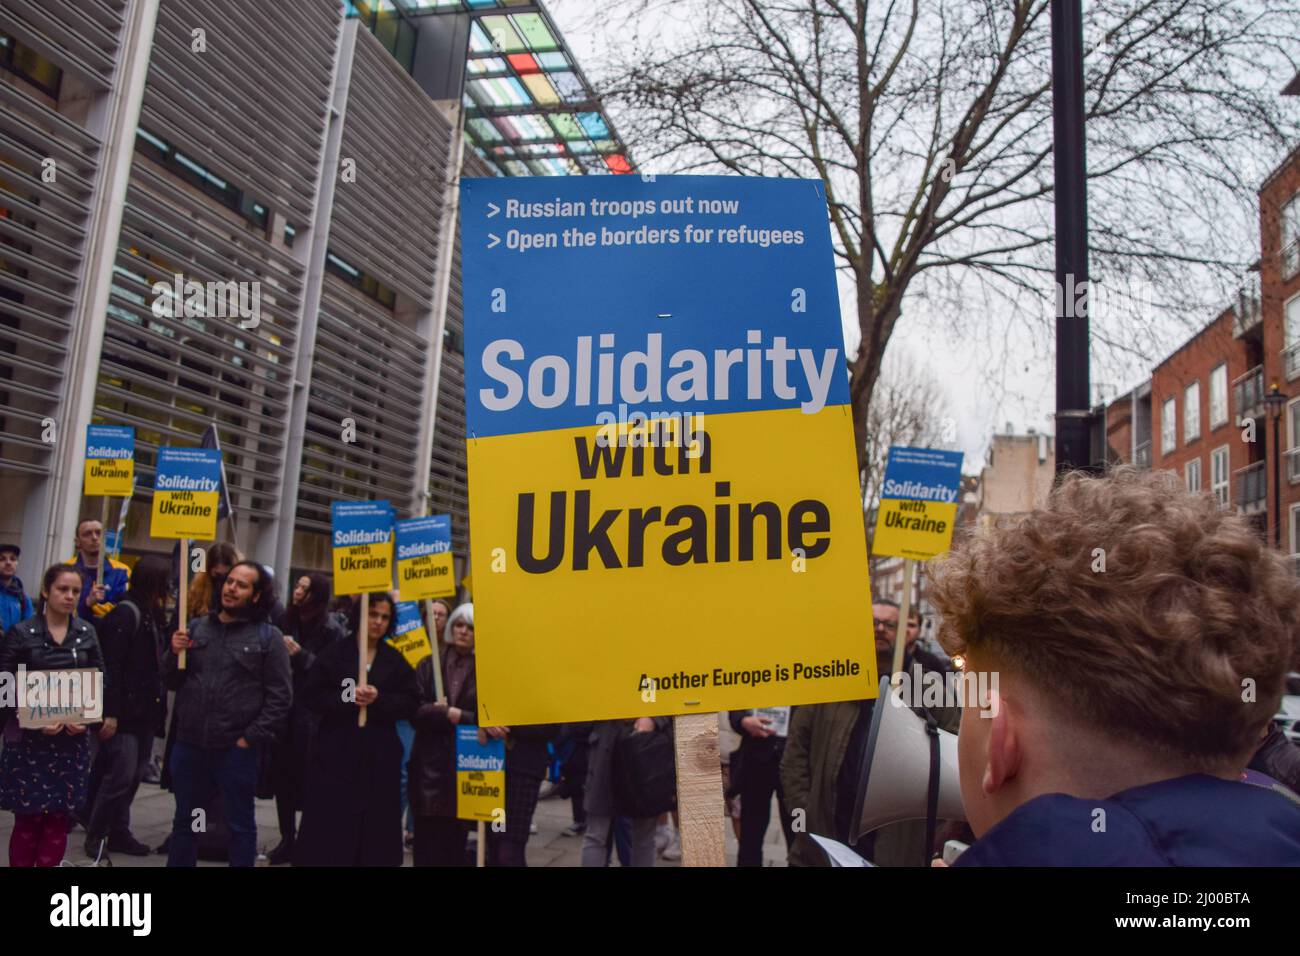 London, UK. 15th March 2022. Protesters gathered outside the Home Office in solidarity with Ukraine and called on the UK Government to waive visa requirements for Ukrainian refugees. Credit: Vuk Valcic/Alamy Live News Stock Photo